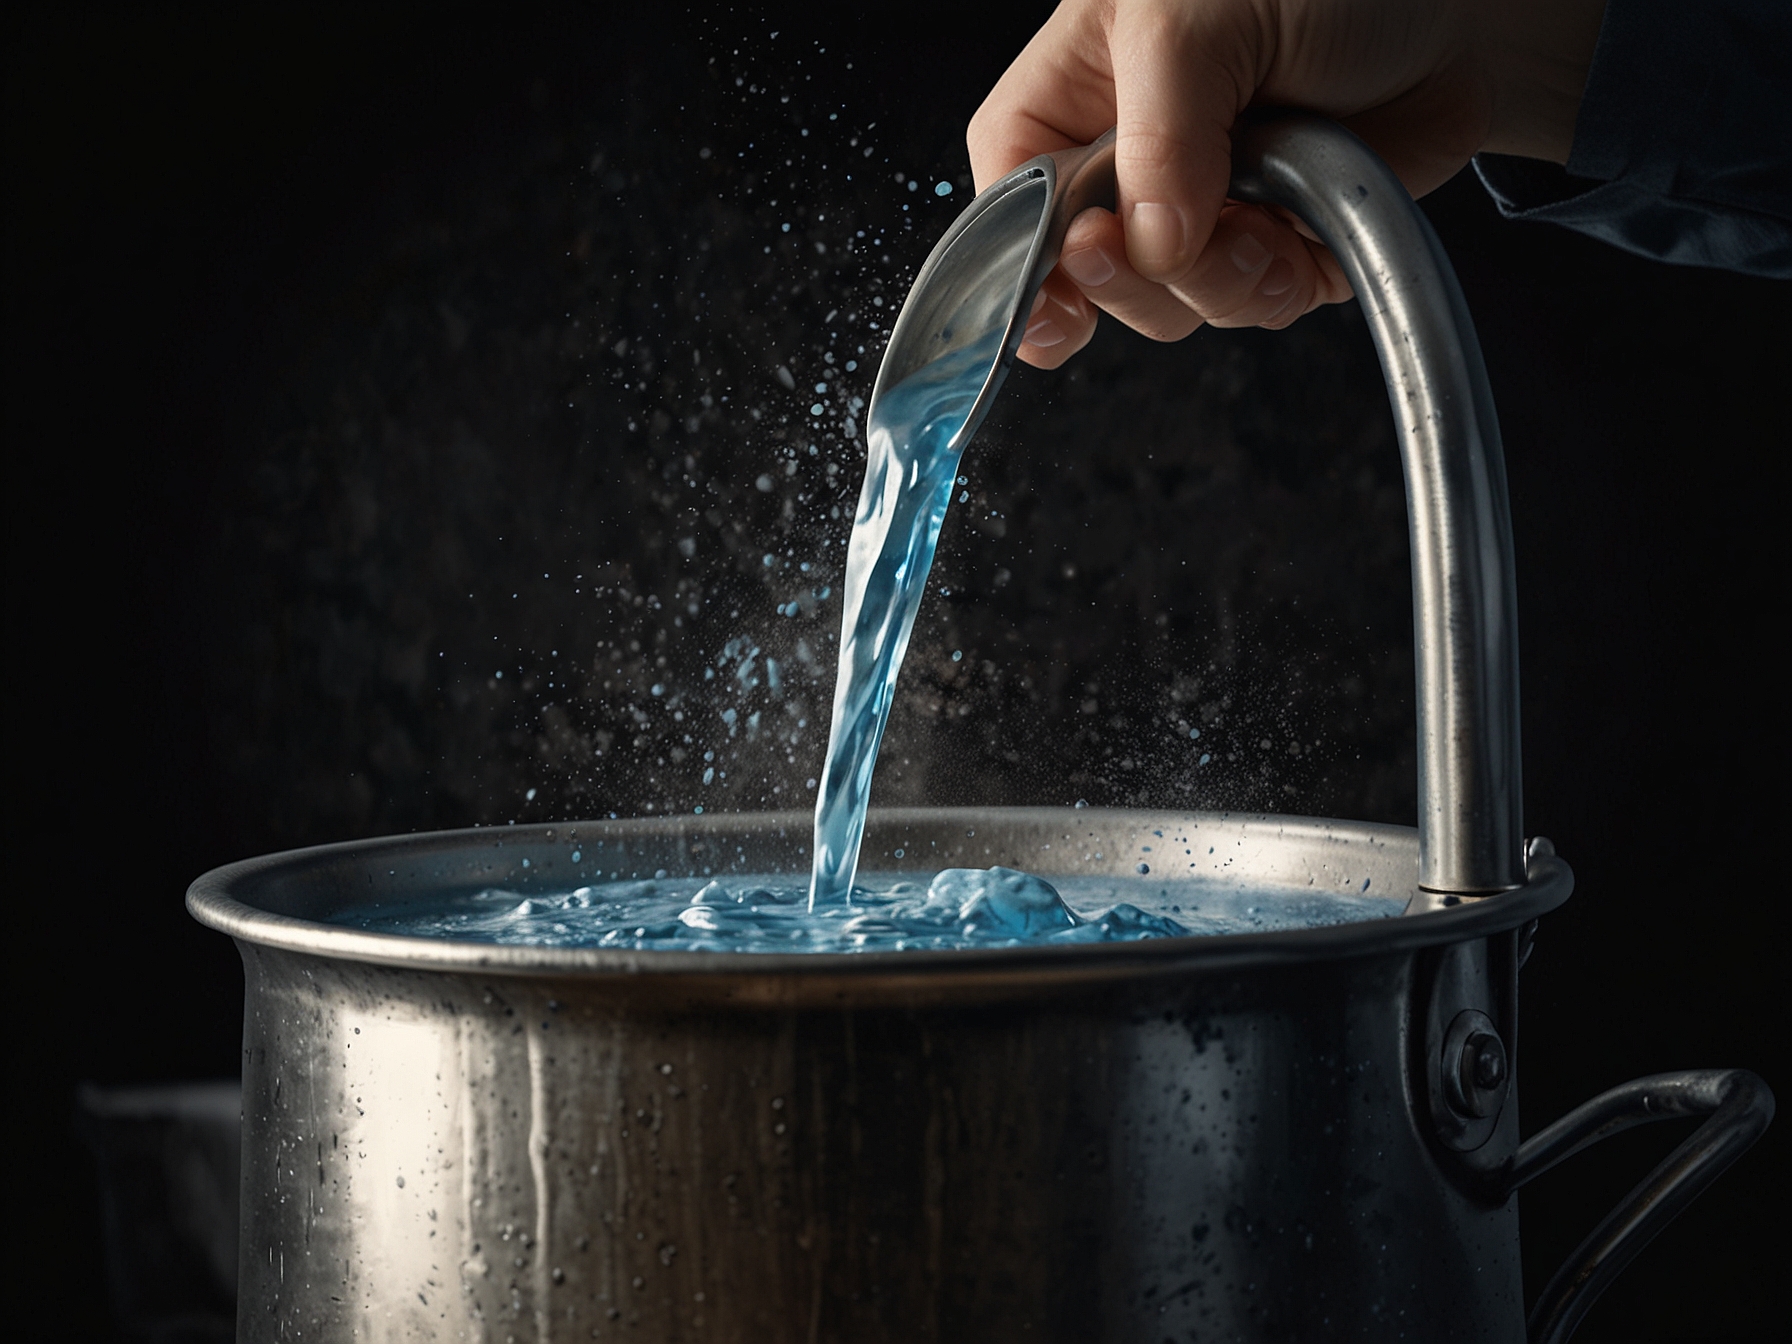 A close-up of citric acid powder being added to a kettle filled halfway with water, demonstrating the beginning of the limescale removal process.